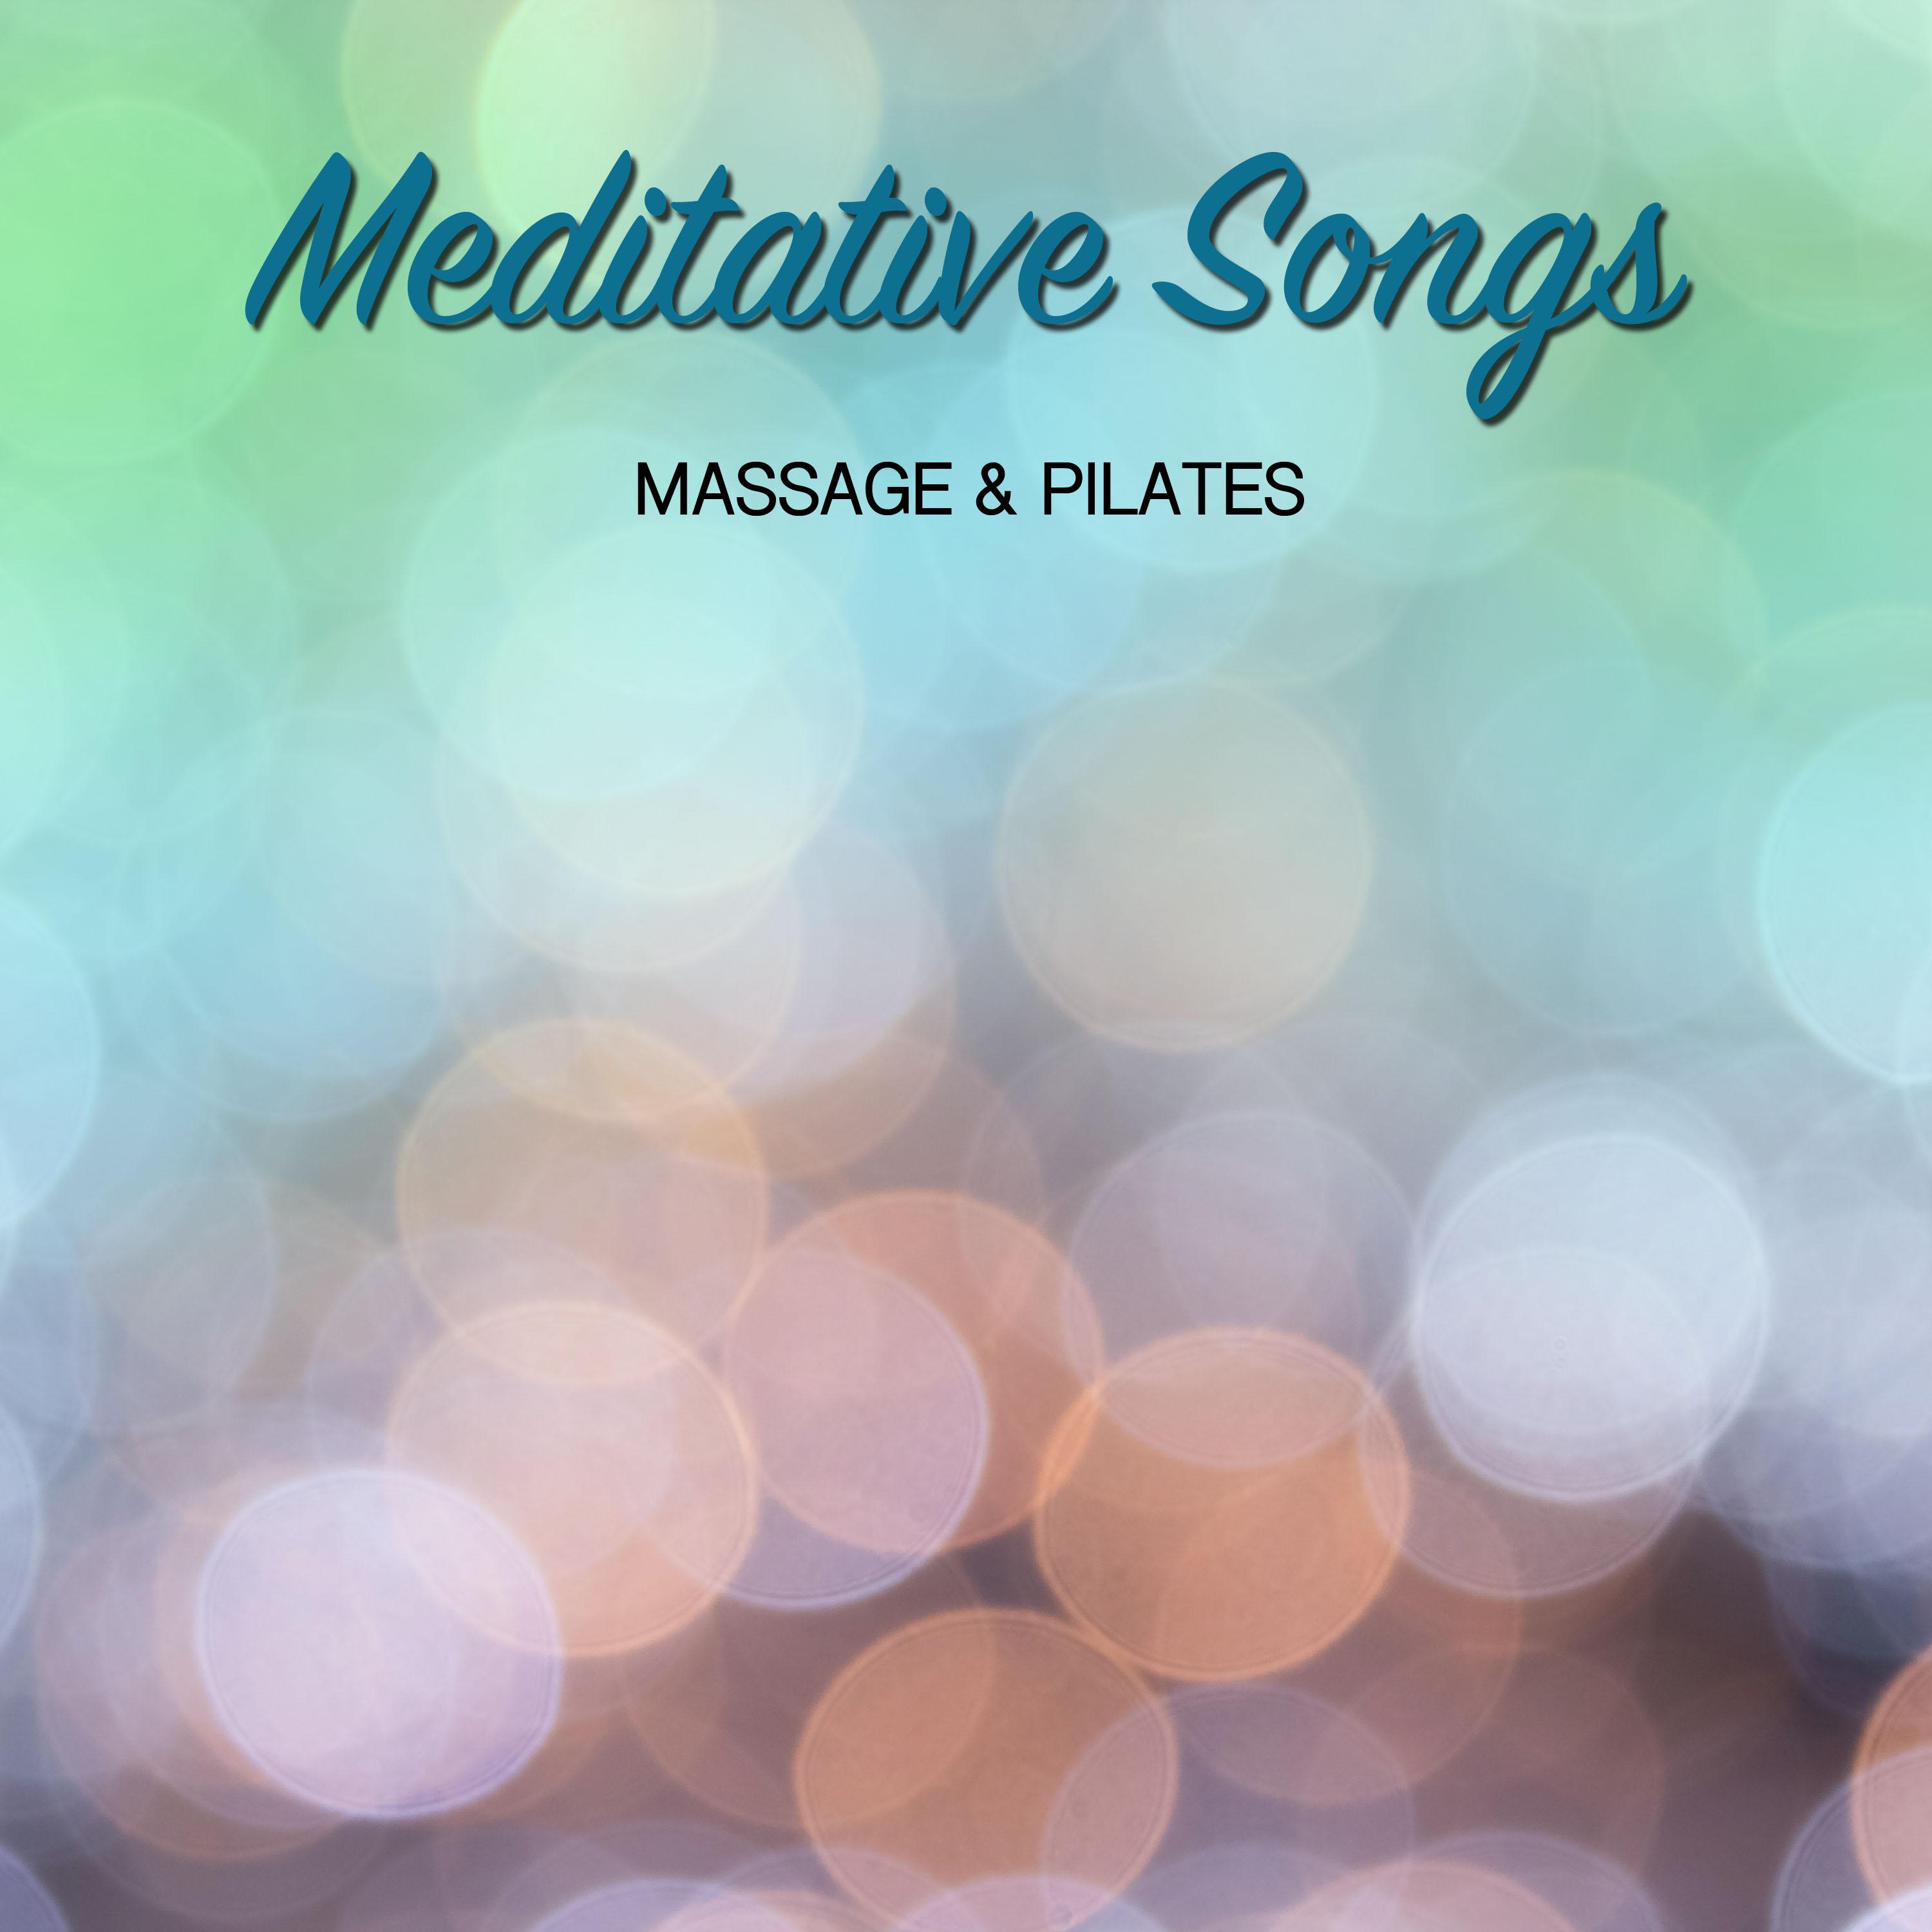 12 Meditative Songs for Massage and Pilates